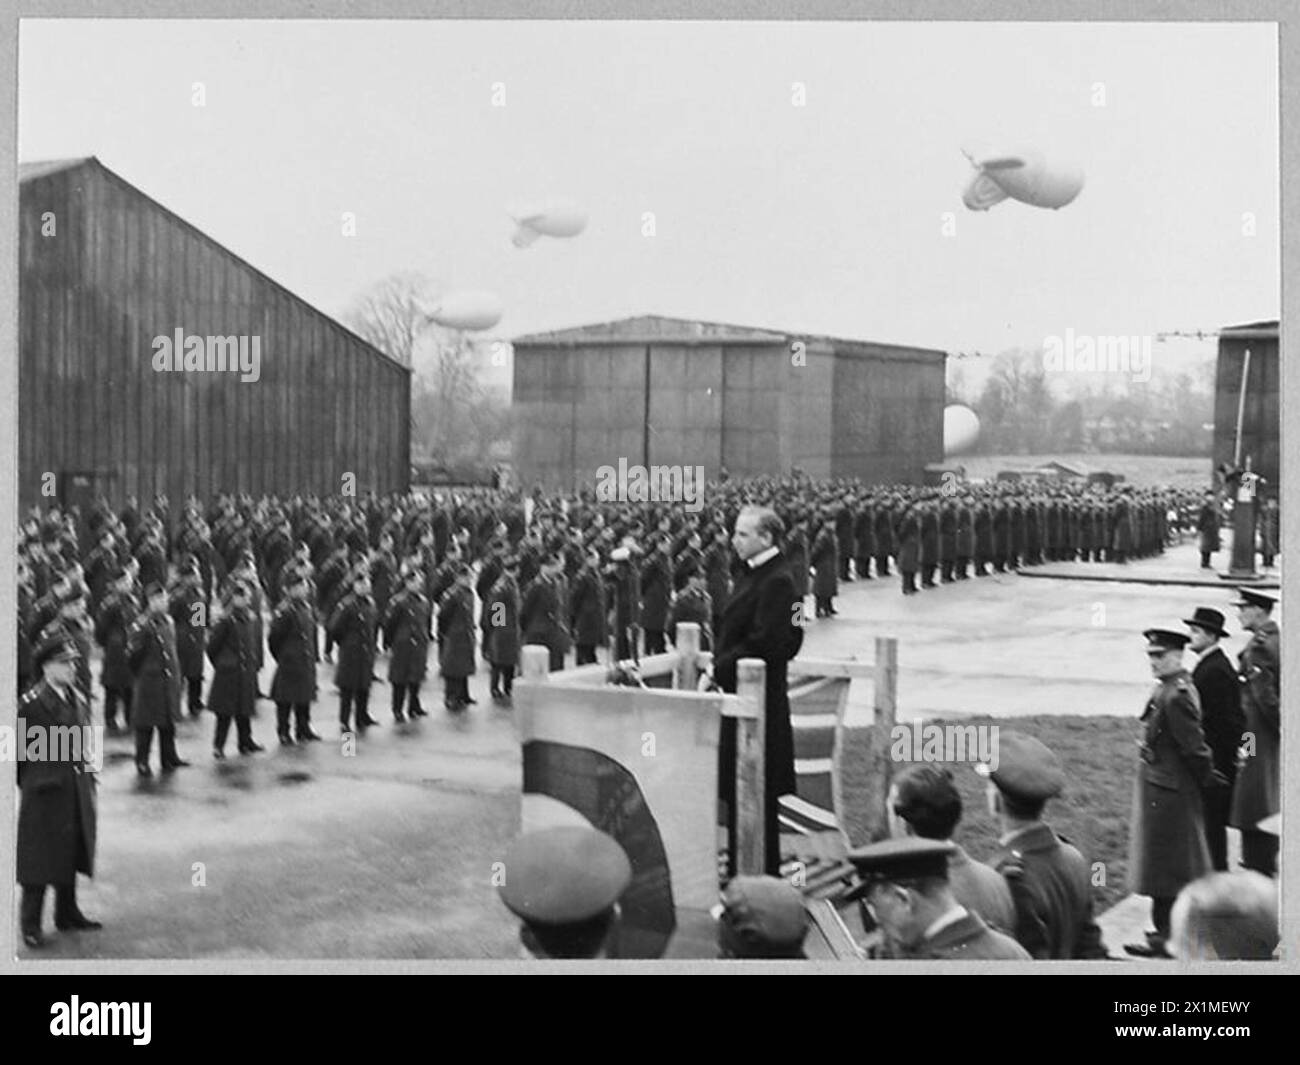 STAND DOWN PARADE OF R.A.F. BALLOON COMMAND - The stand-down of R.A.F. Balloon command was announced by Sir Archibald Sinclair, Secretary of State for Air, at a parae at the Command's headquarters on 5th February 1945. The Air Minister addressing the parade, Royal Air Force Stock Photo